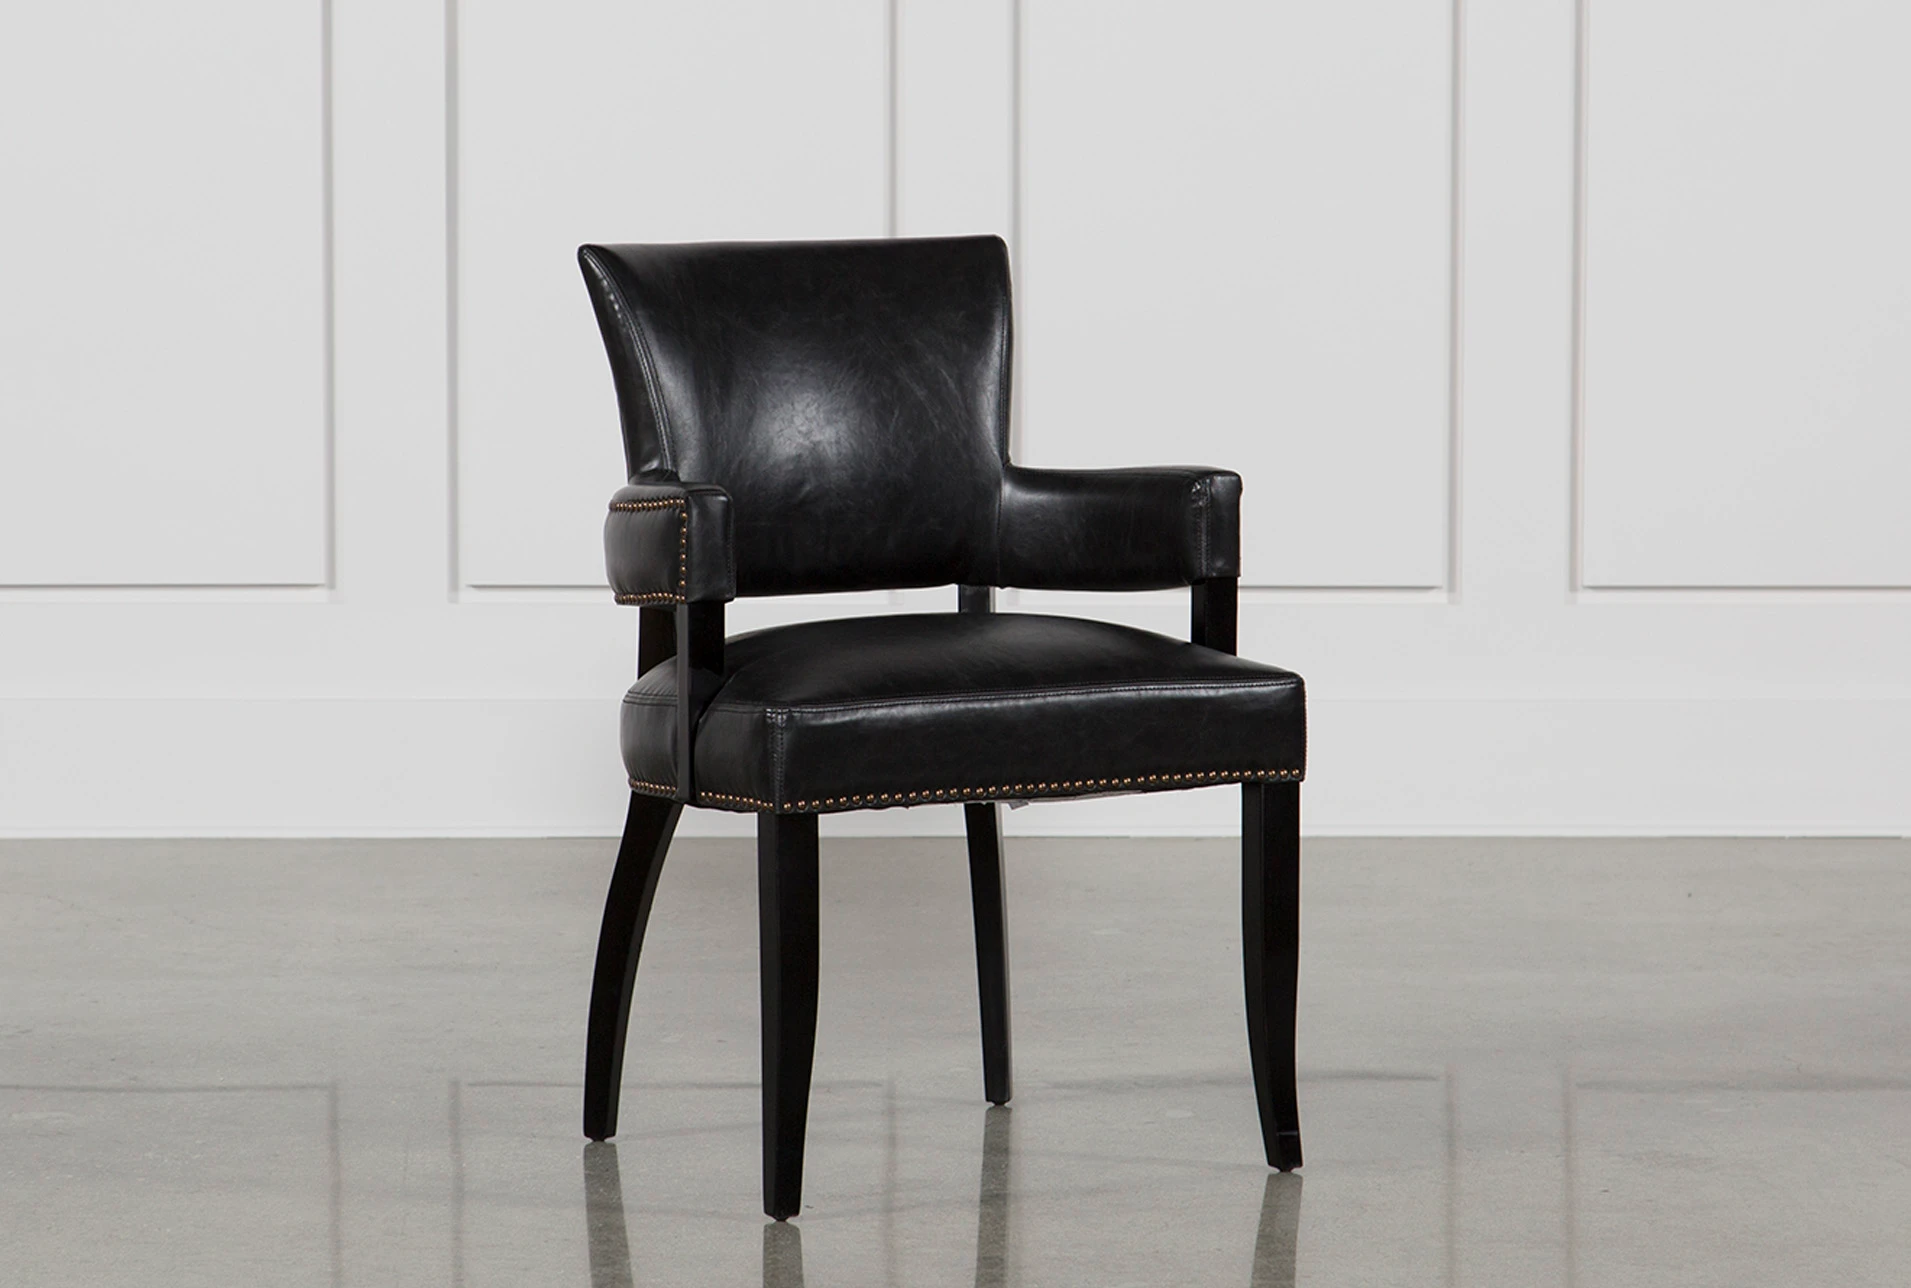 Dining Room Chair Wood With Black Leather Seat